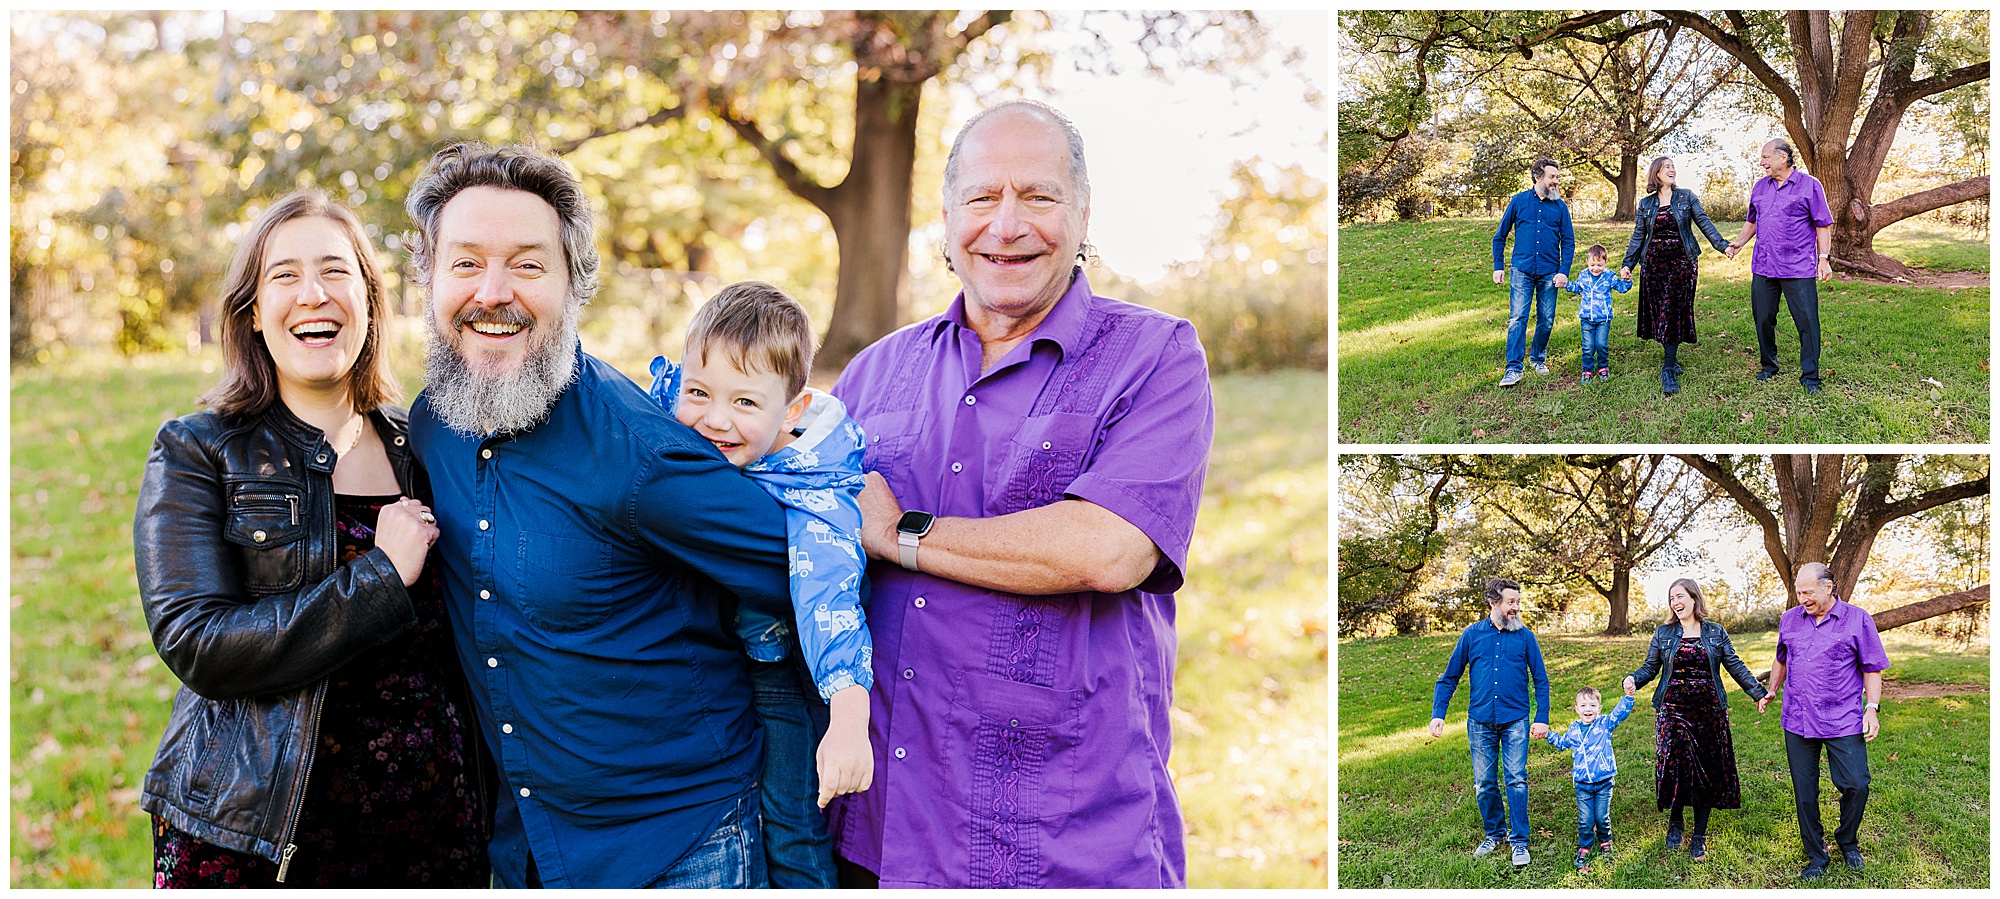 Cute family photos with Hudson Valley photographers